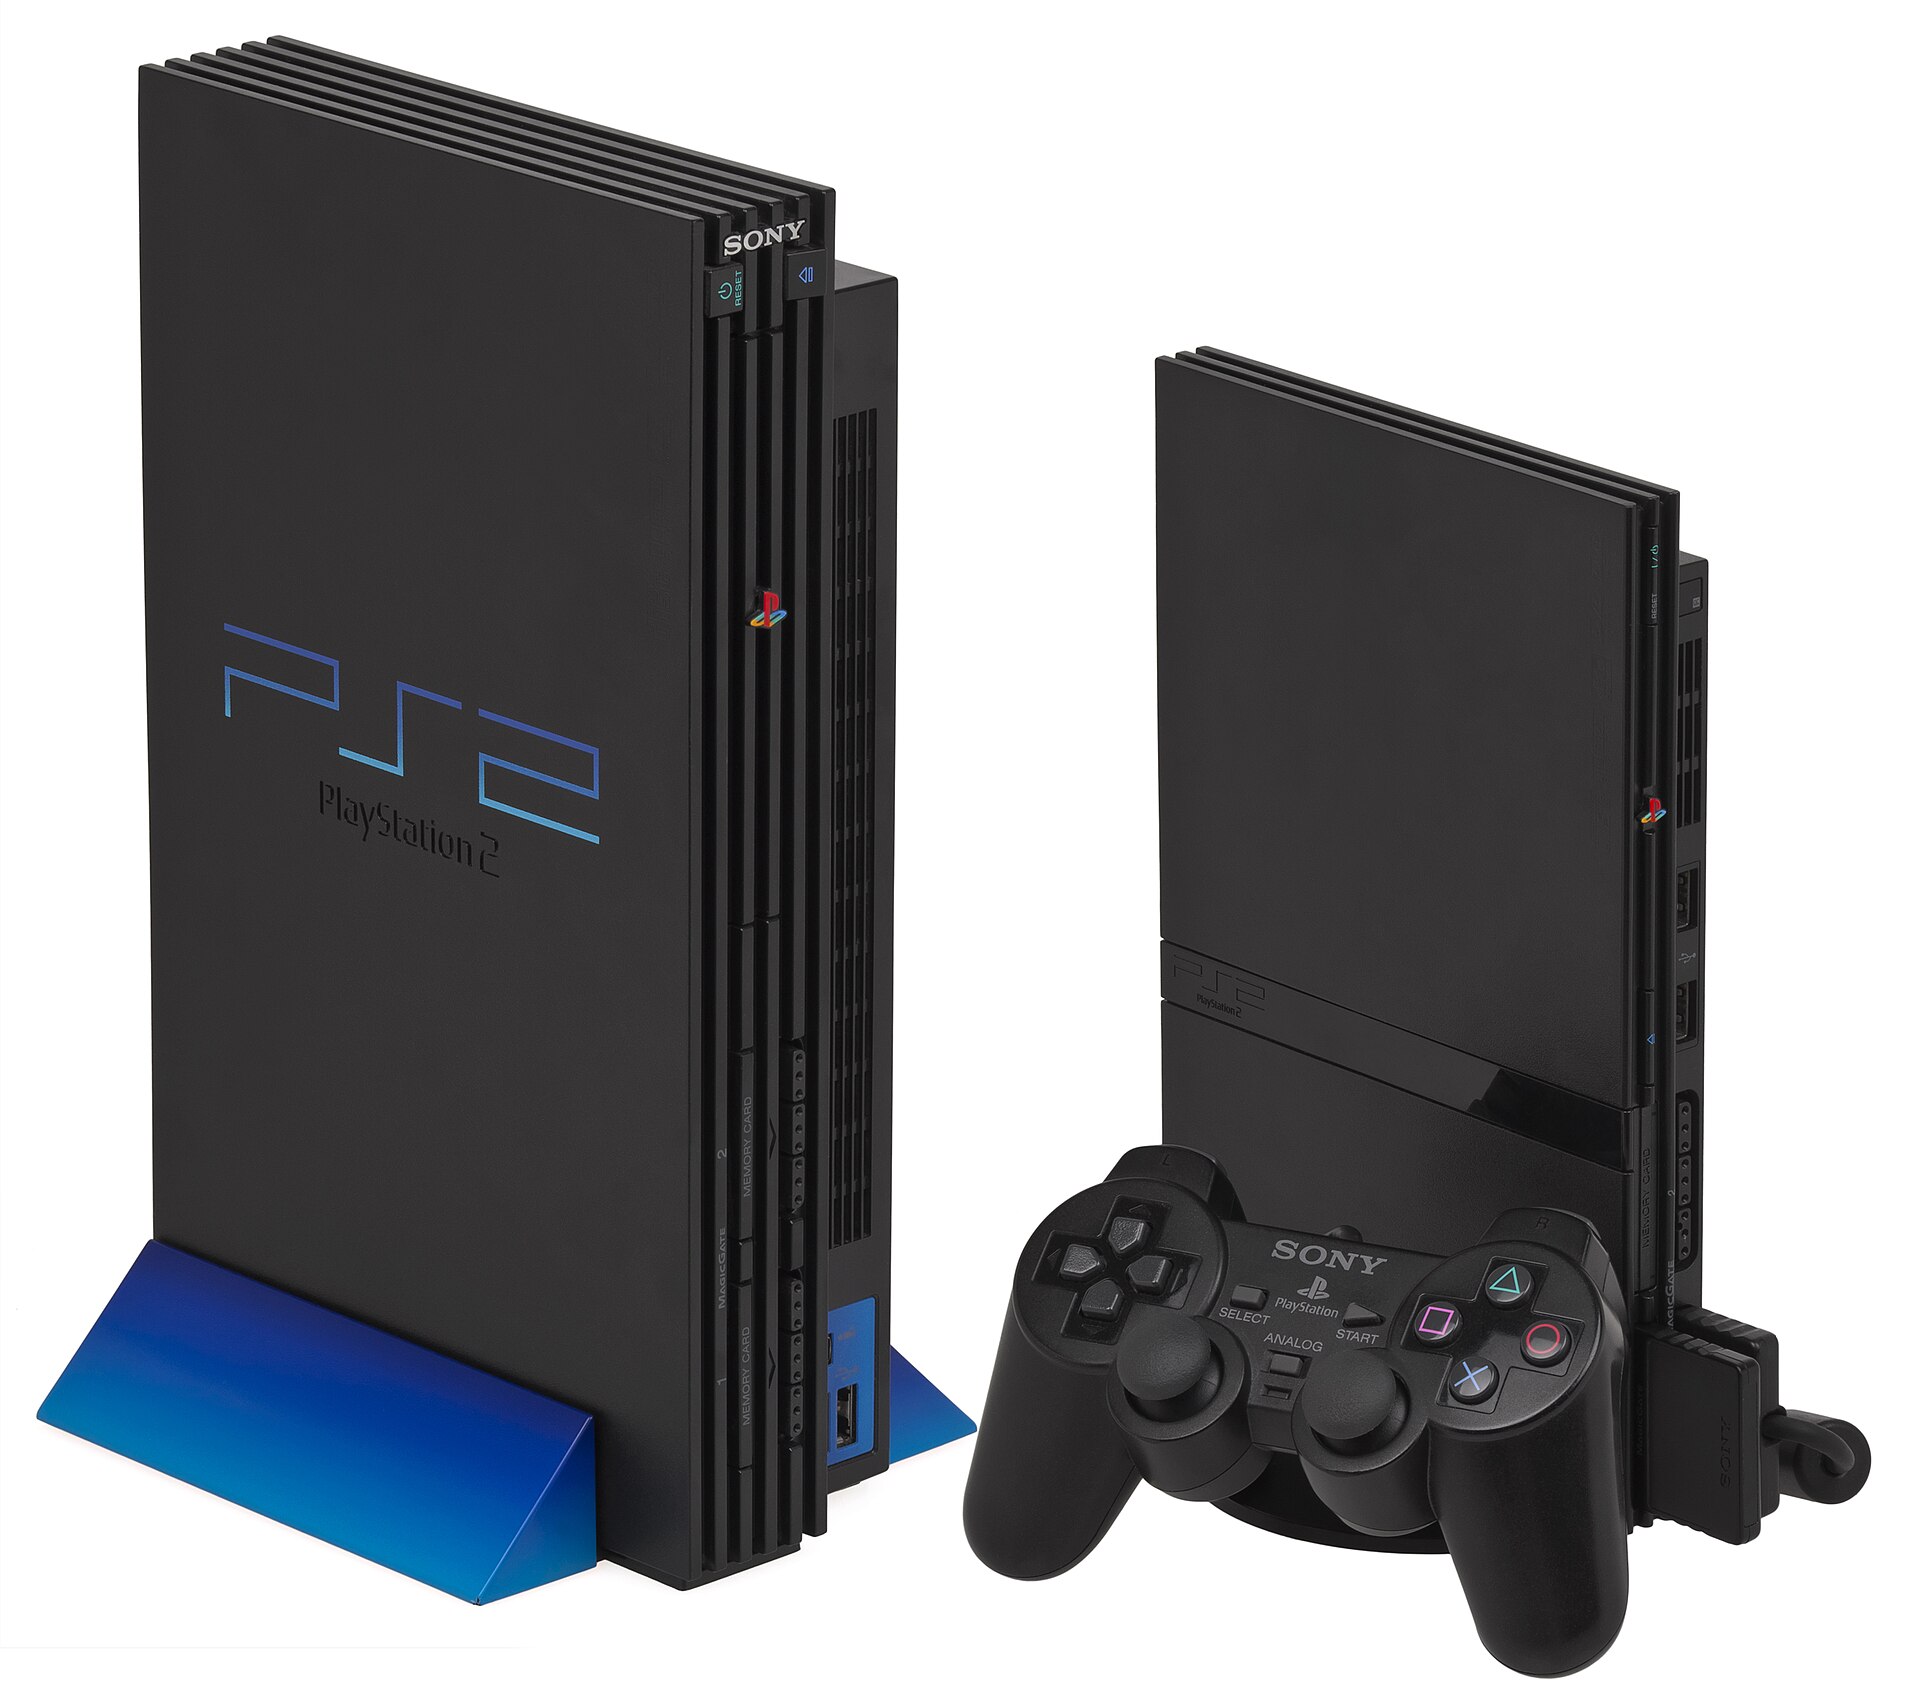 PlayStation 2 game console